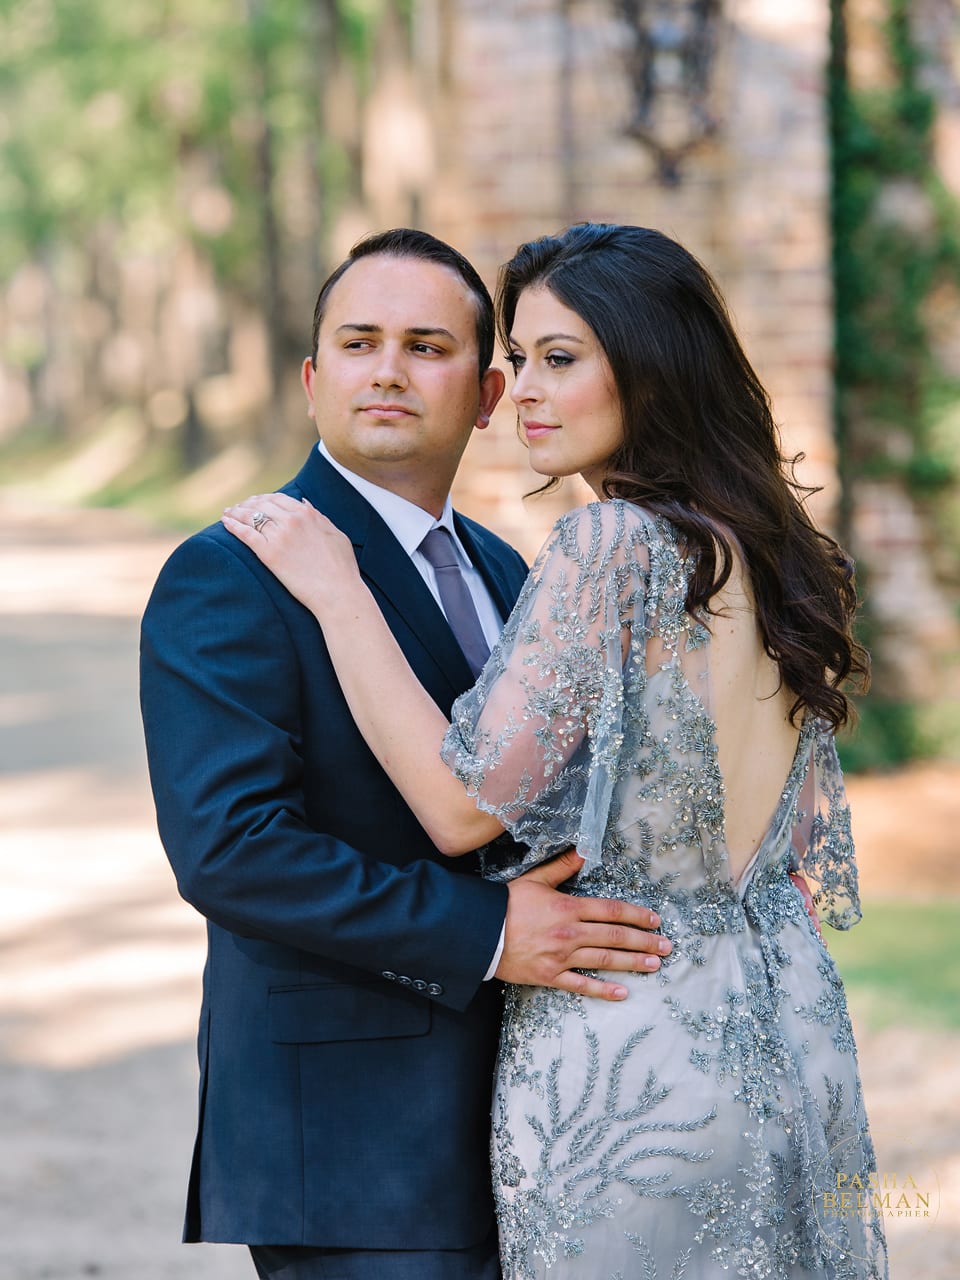 Mansfield Plantation Engagement Session with Ashley and Joey by Pasha Belman Photography 